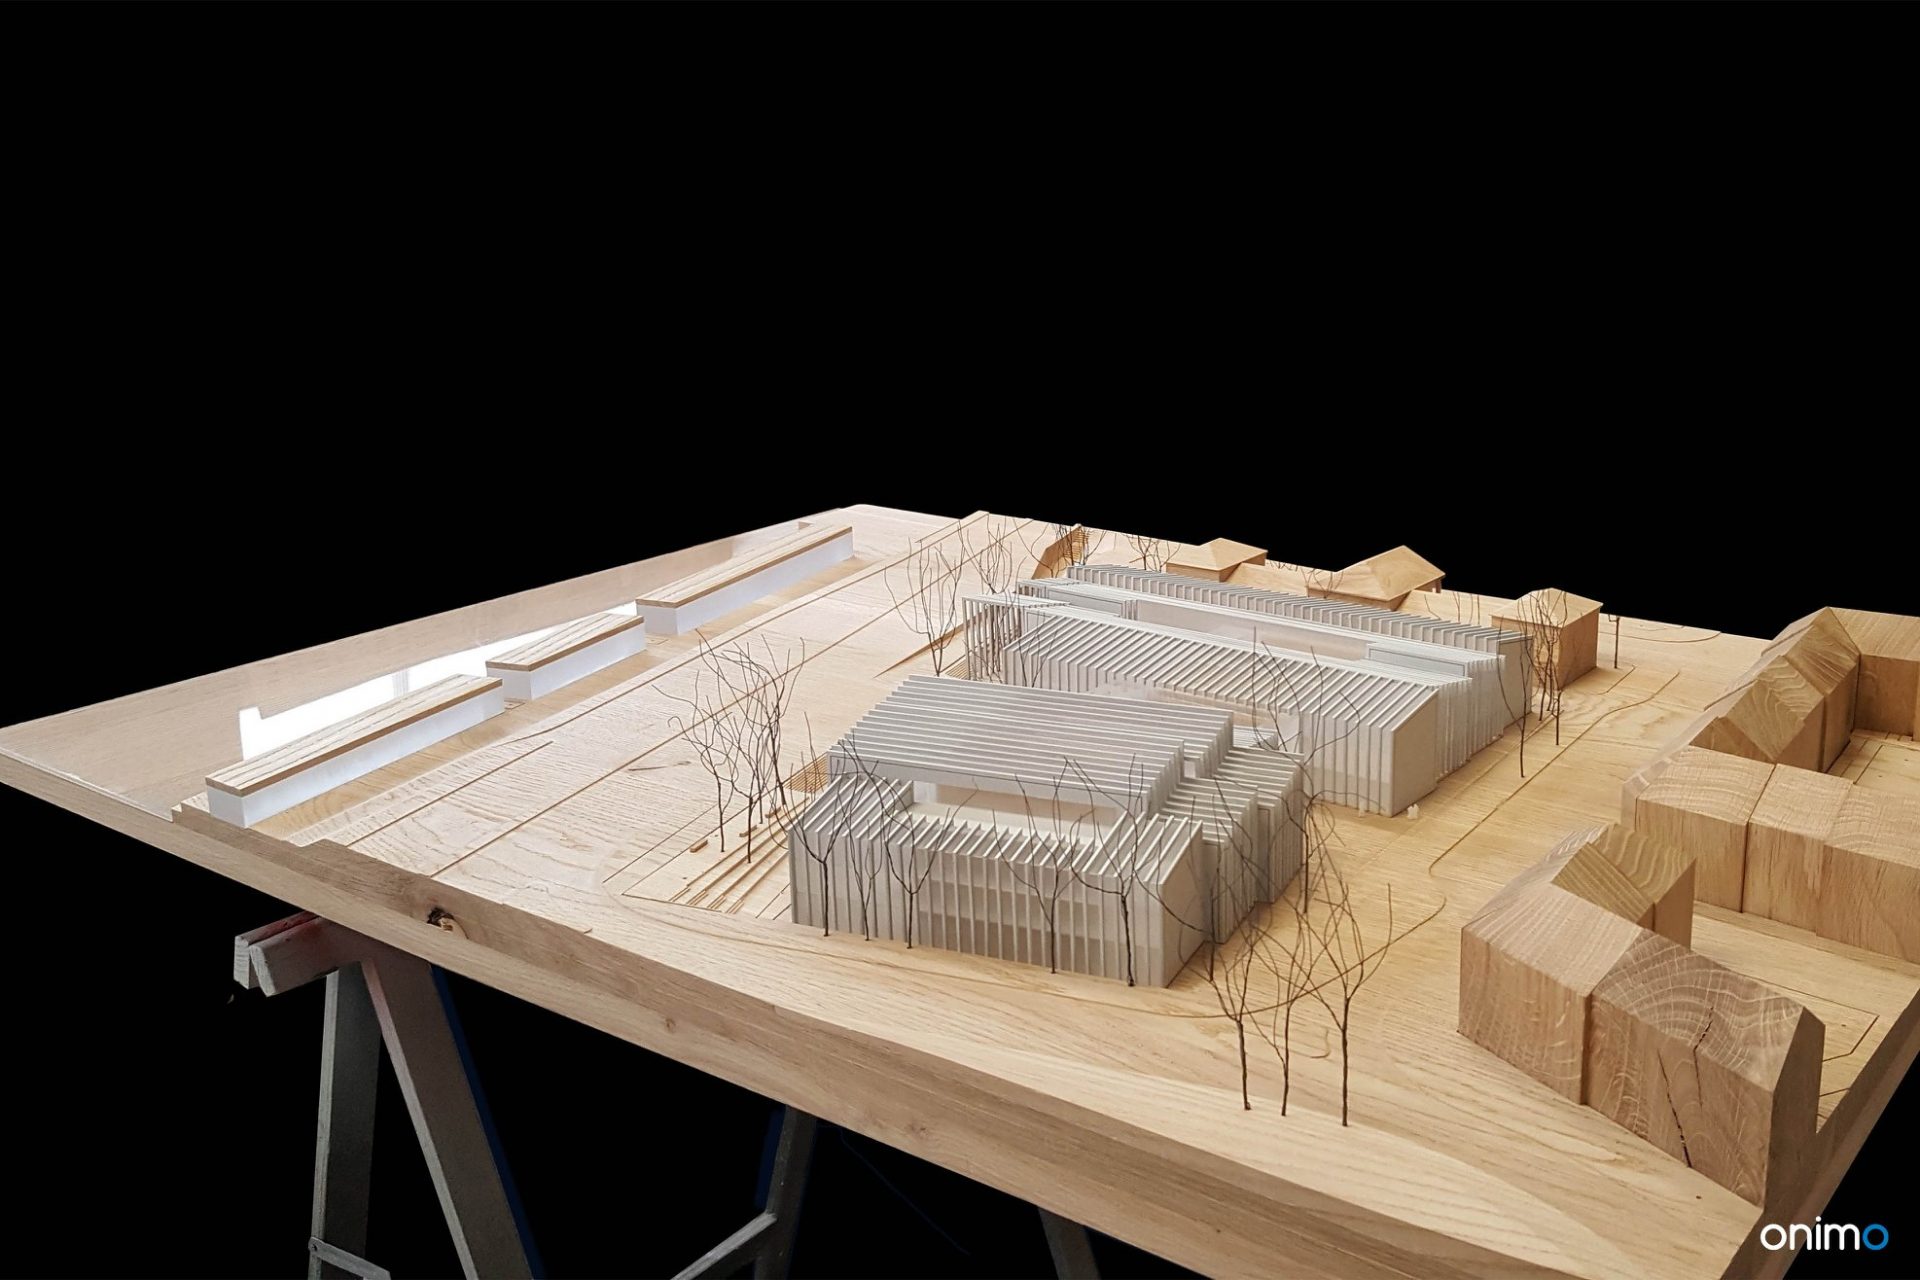 Didactic building of the University of Warsaw | Atelier Tektura, ONIMO, best architectural models, best building models